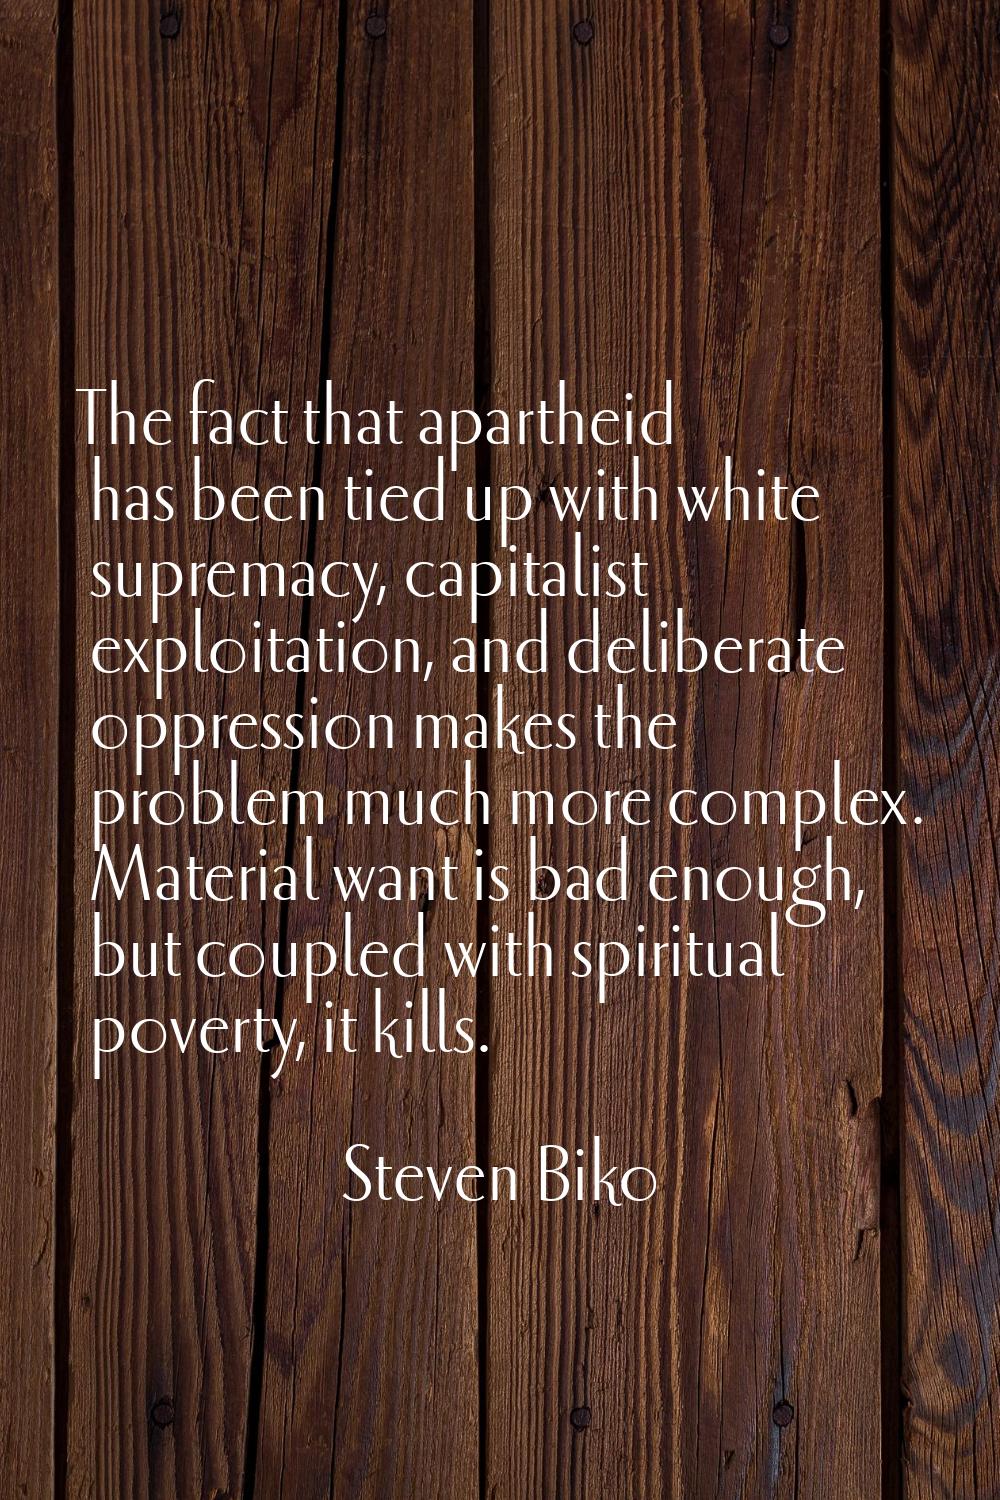 The fact that apartheid has been tied up with white supremacy, capitalist exploitation, and deliber